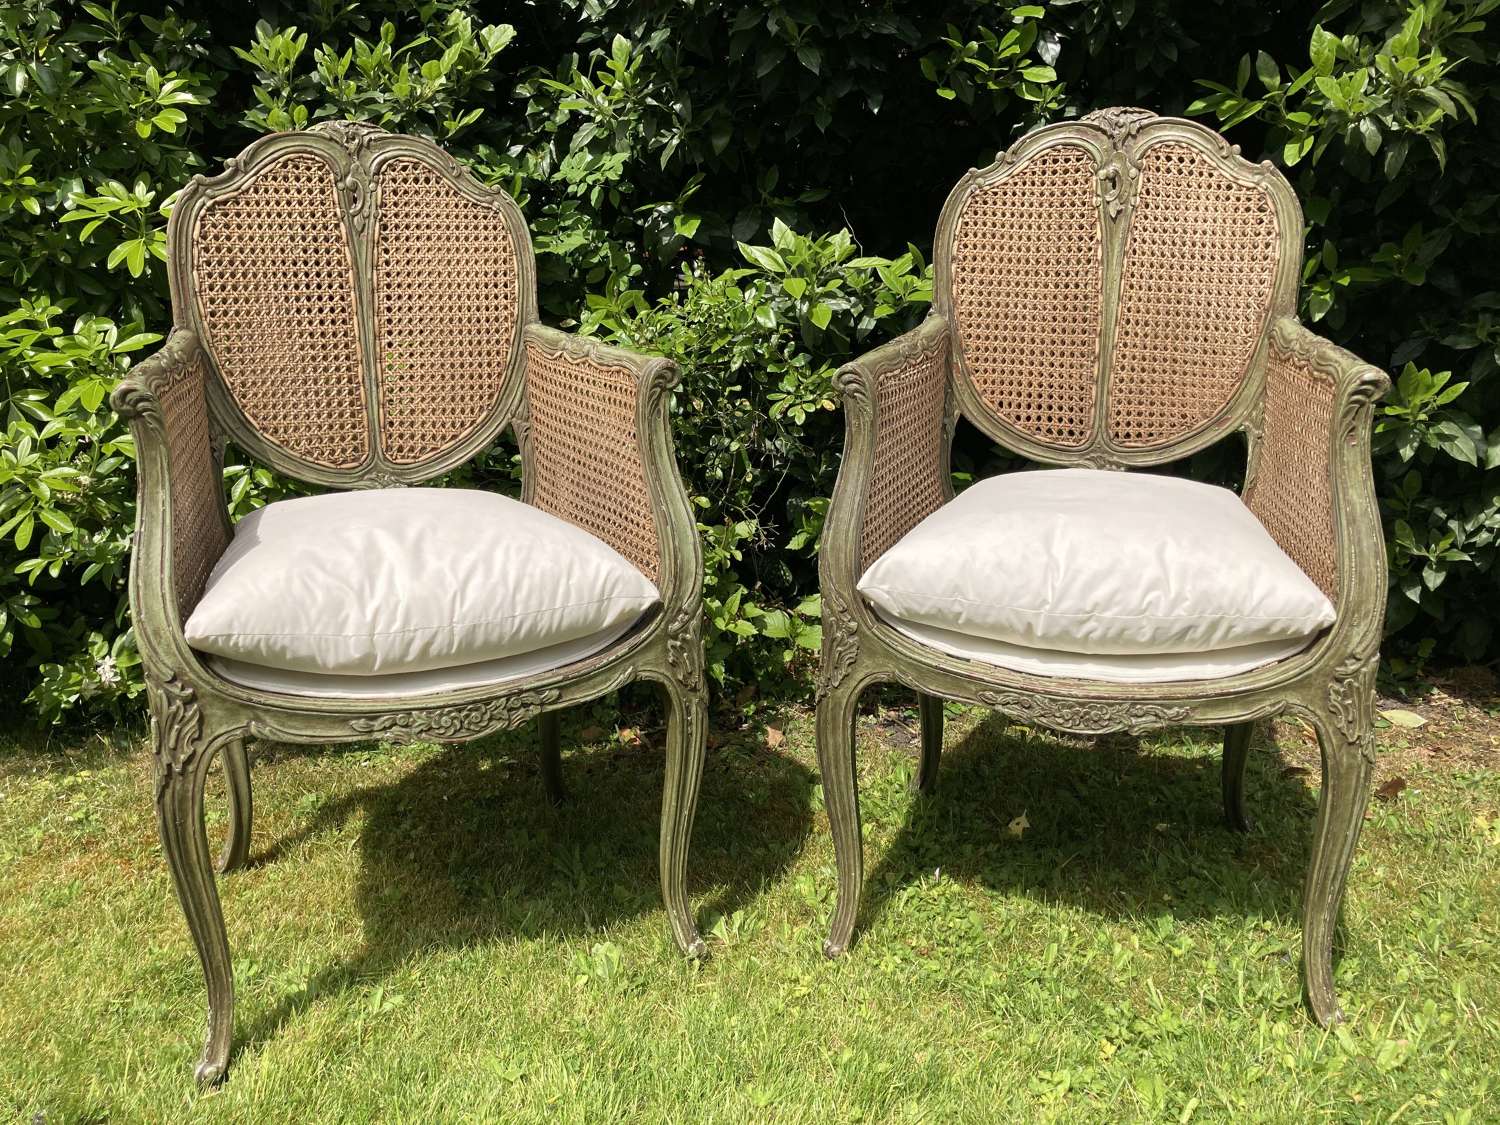 Pair of French Cane Painted Chairs